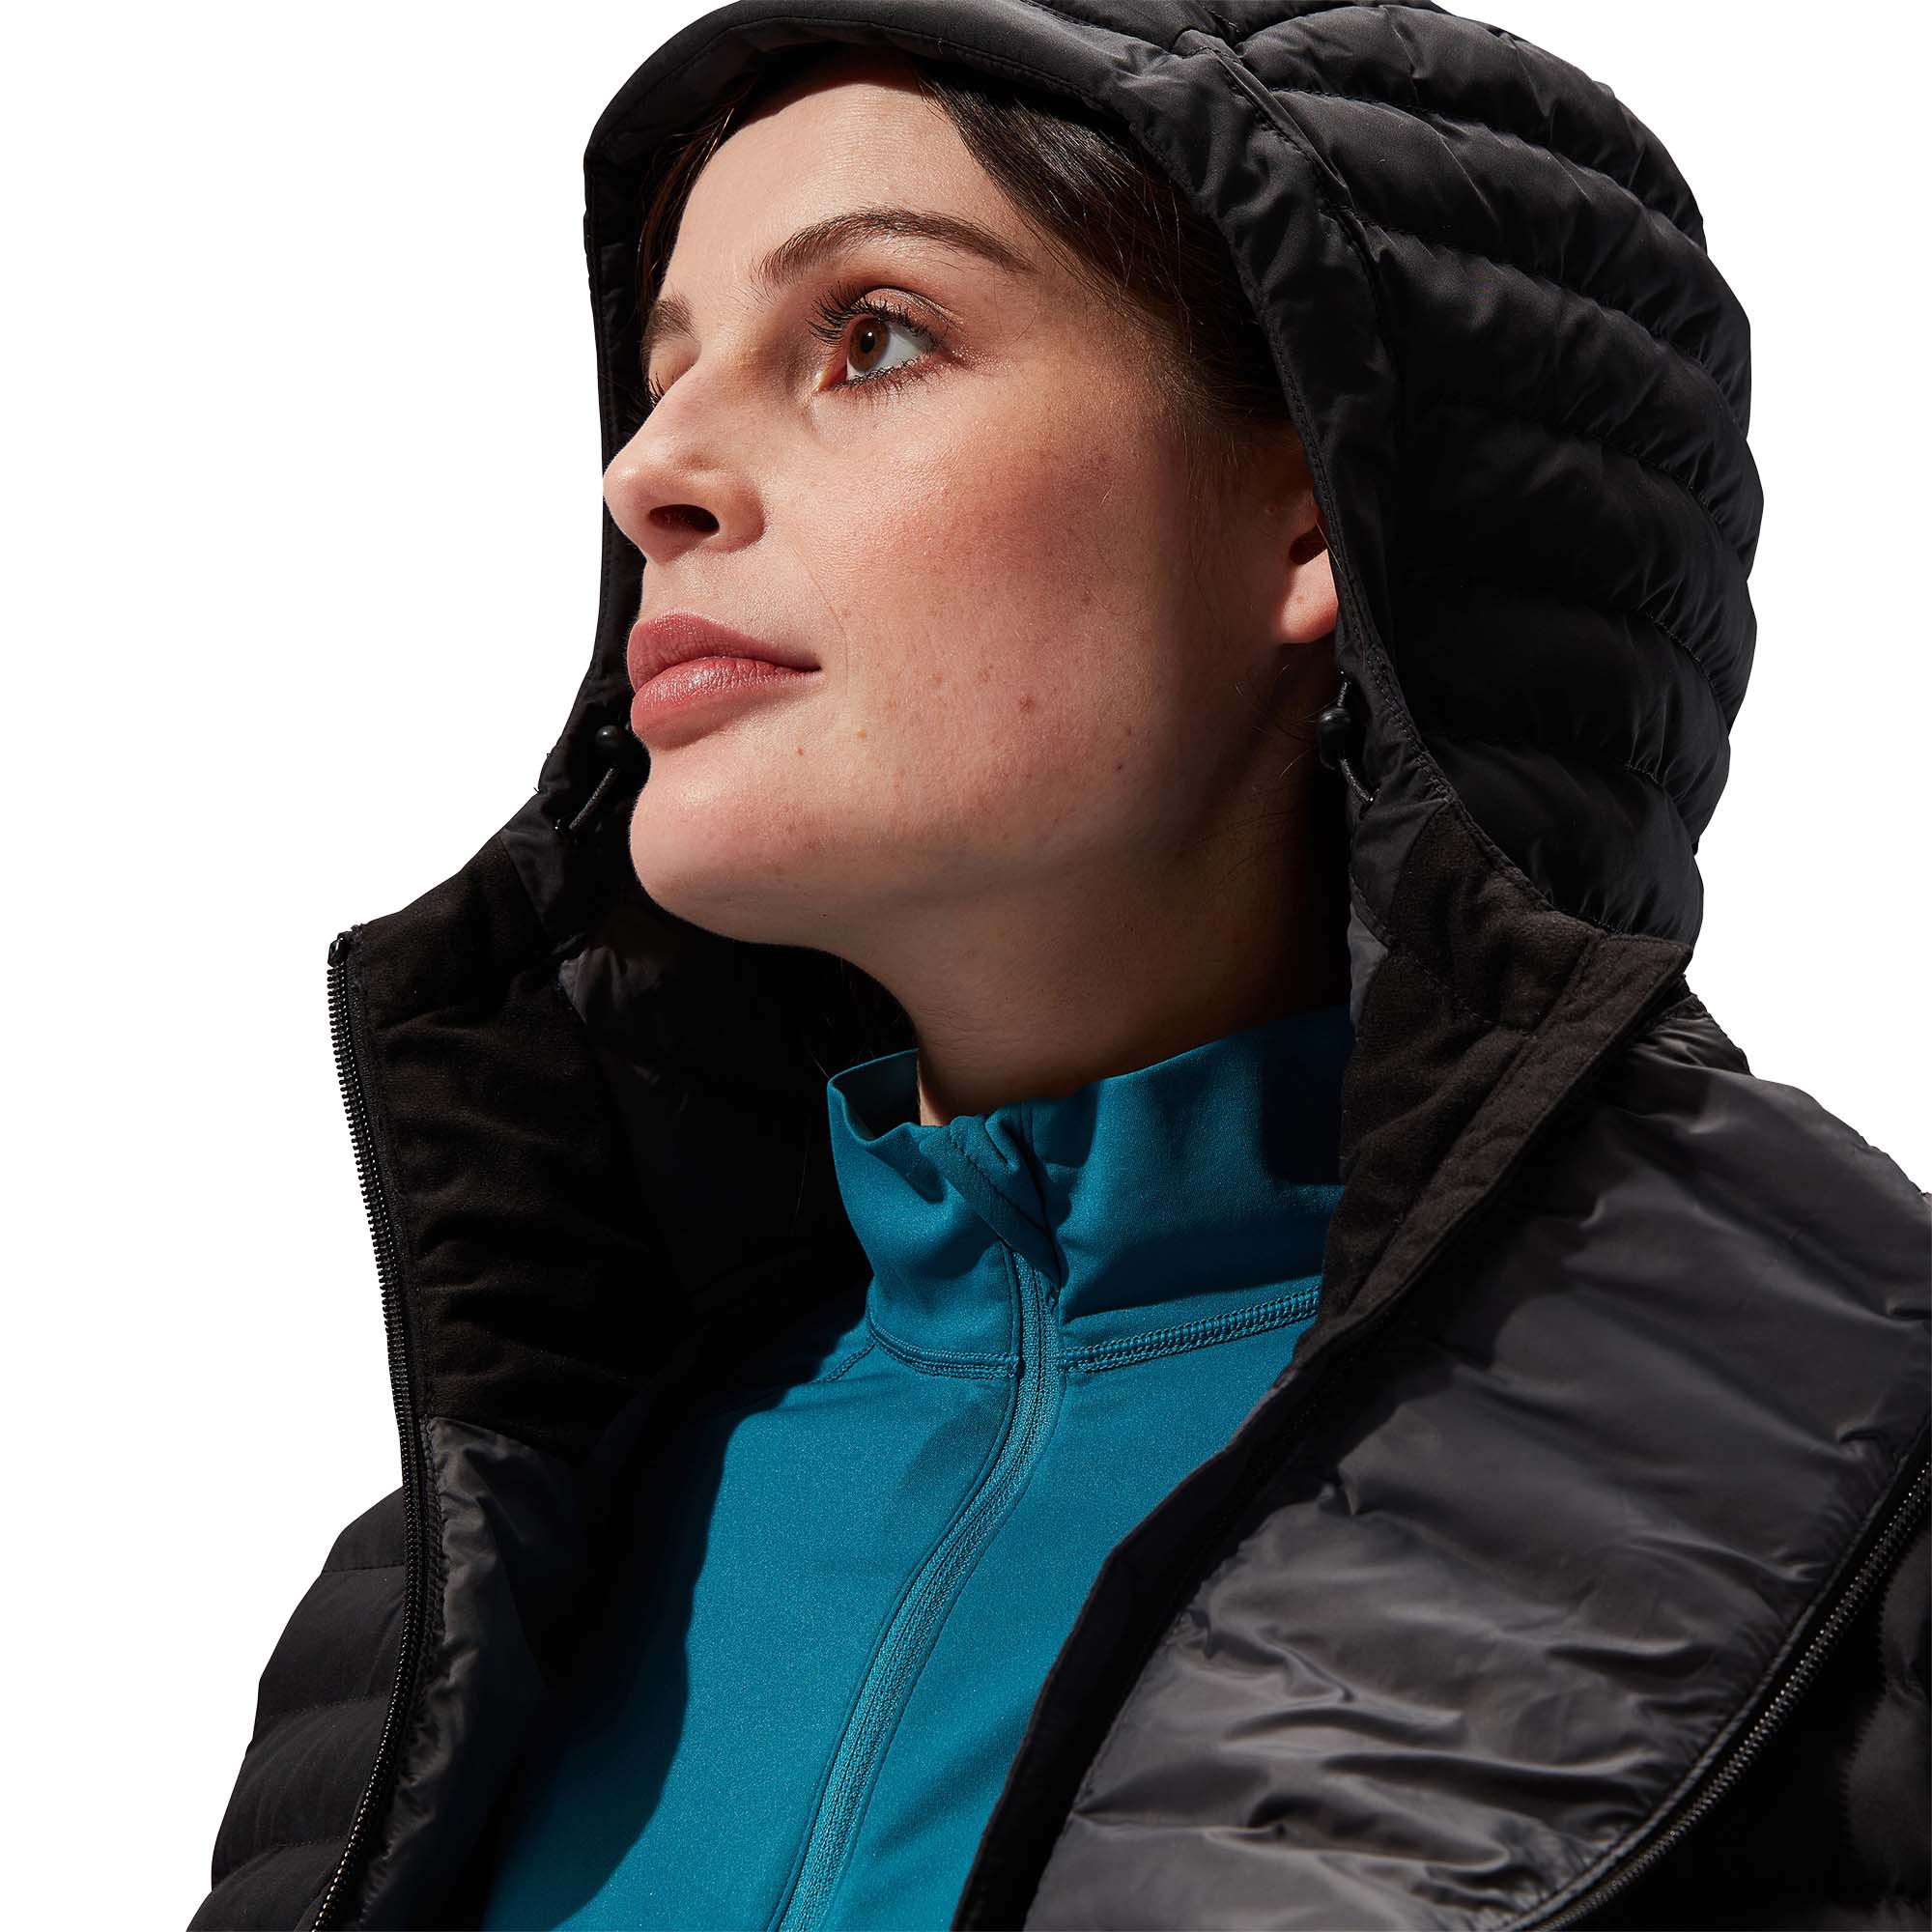 Berghaus Nula Maternity 2in1 Women's Insulated Jacket